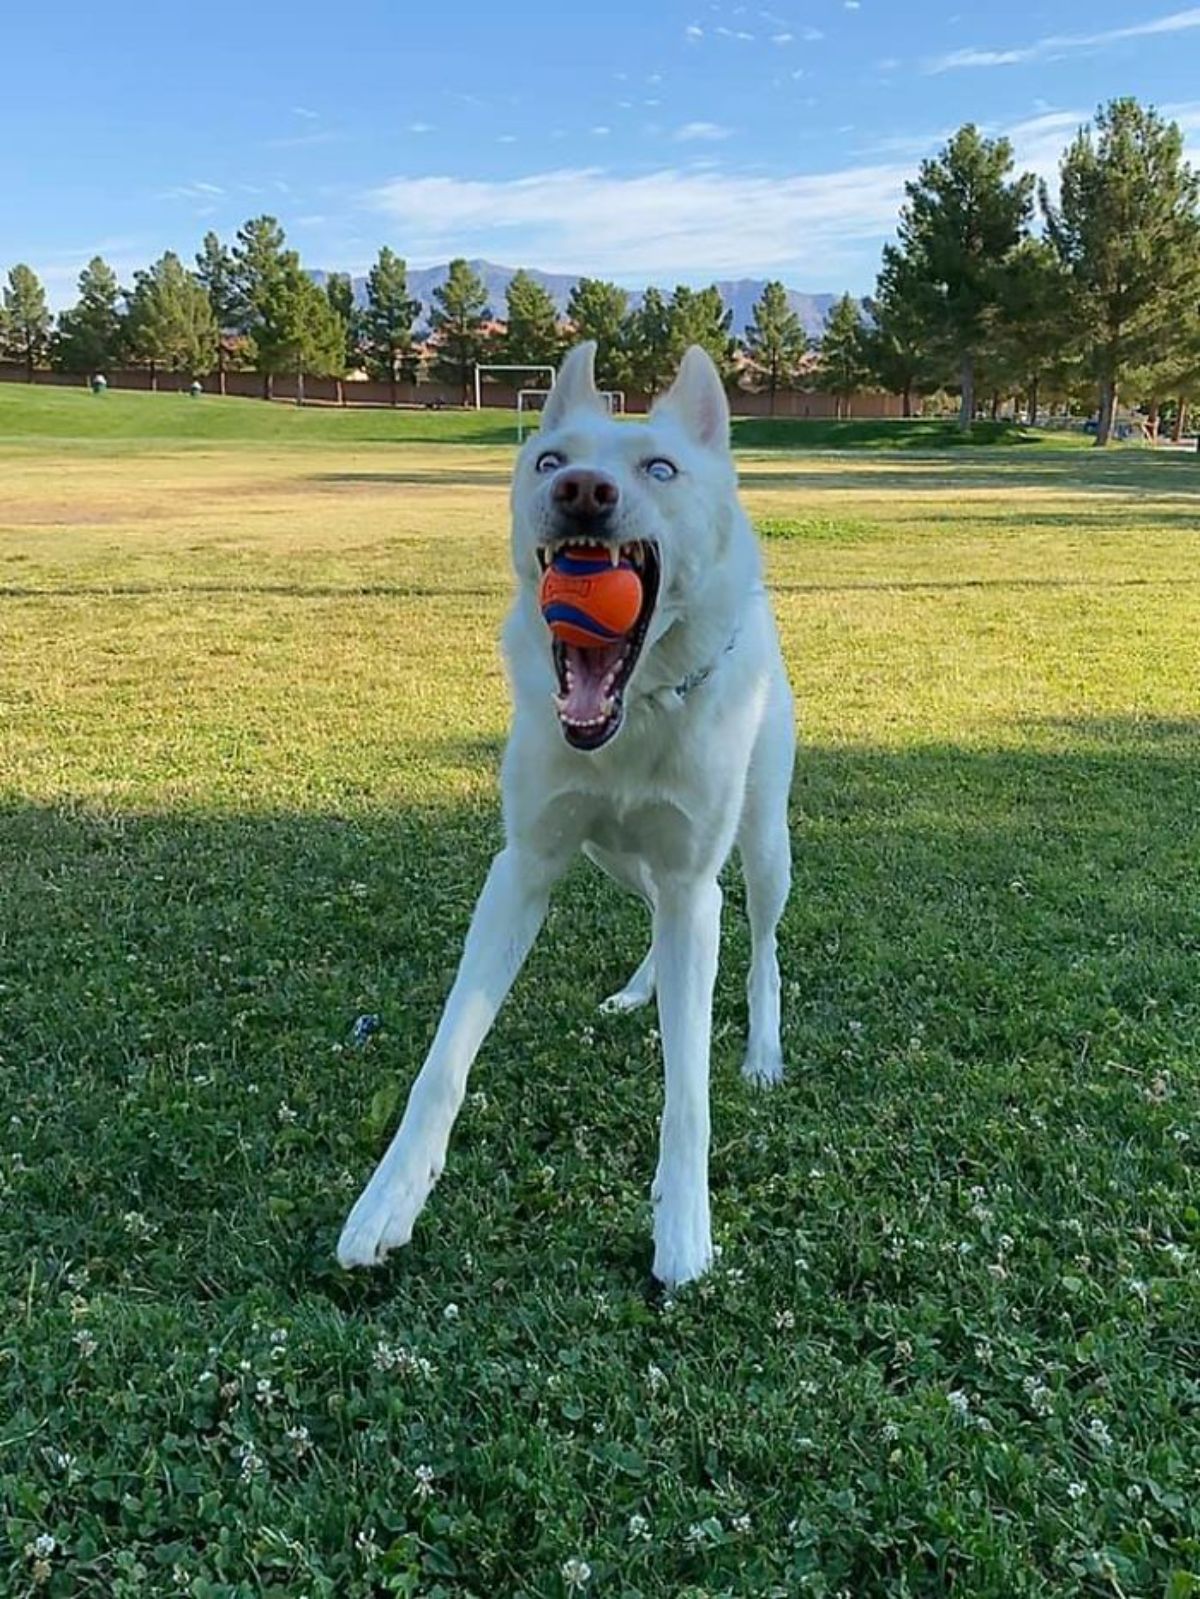 white dog standing on grass with mouth wide open with an orange ball with blue stripes inside the mouth